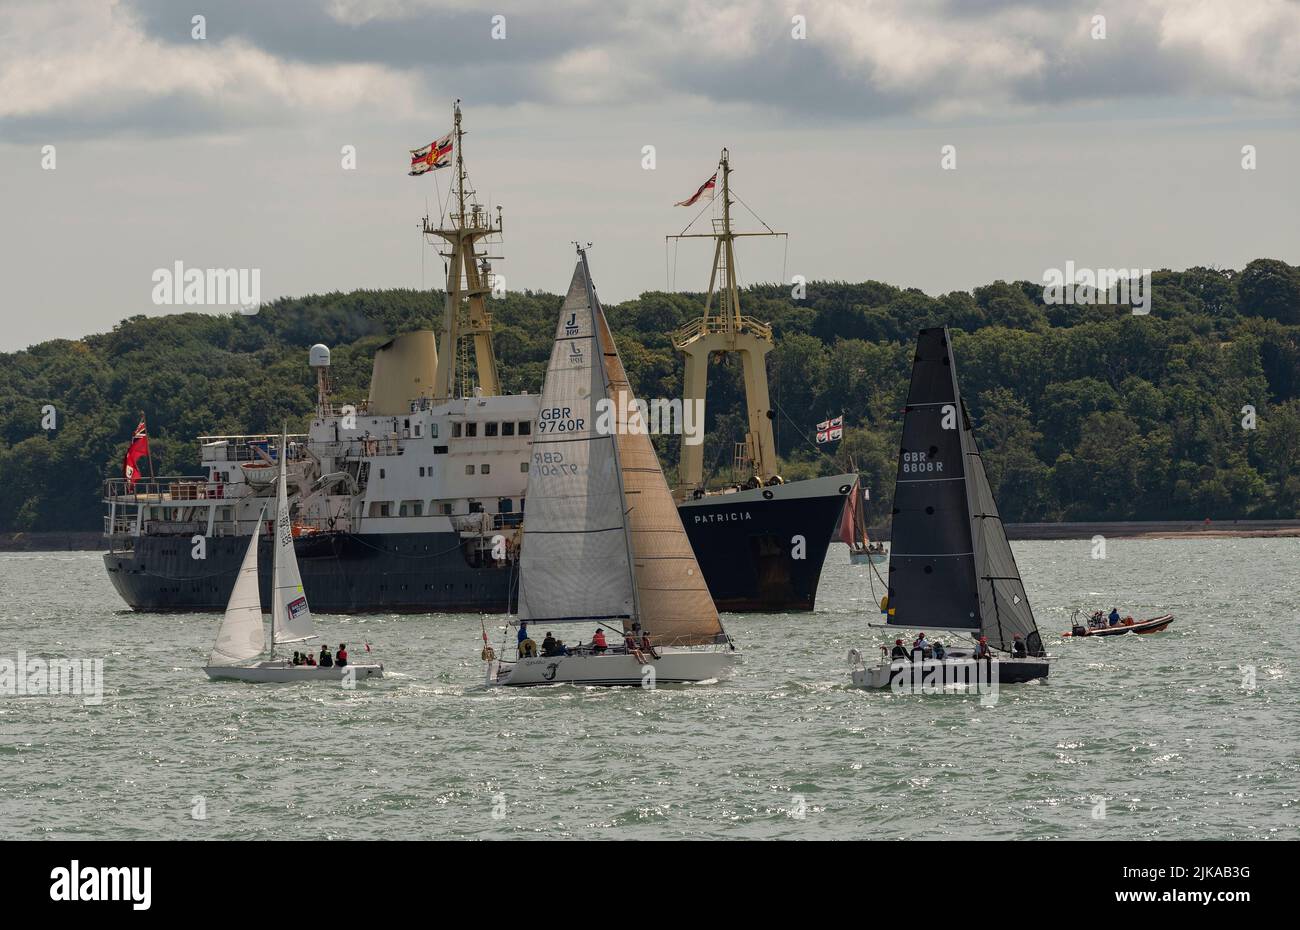 Kirbys are Synonymous with Sailing - Newport This Week